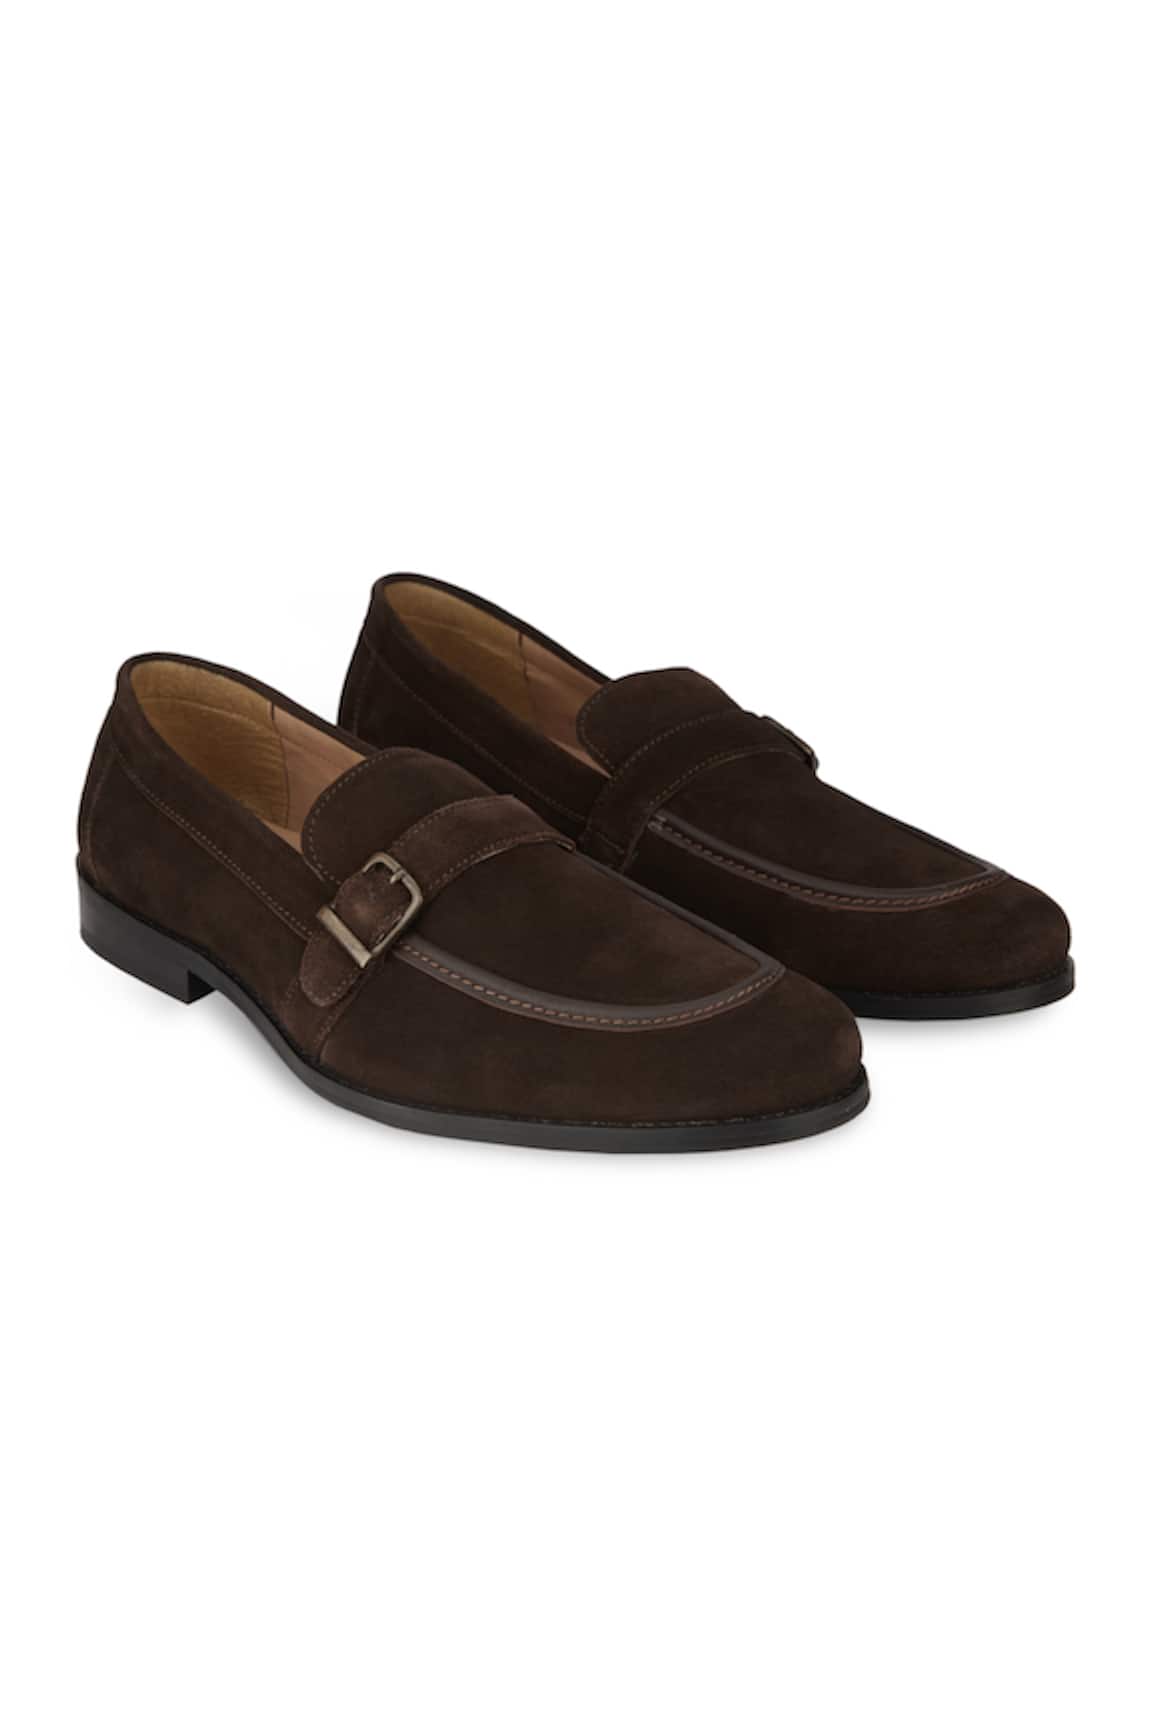 Hats Off Accessories Suede Monk Penny Loafers